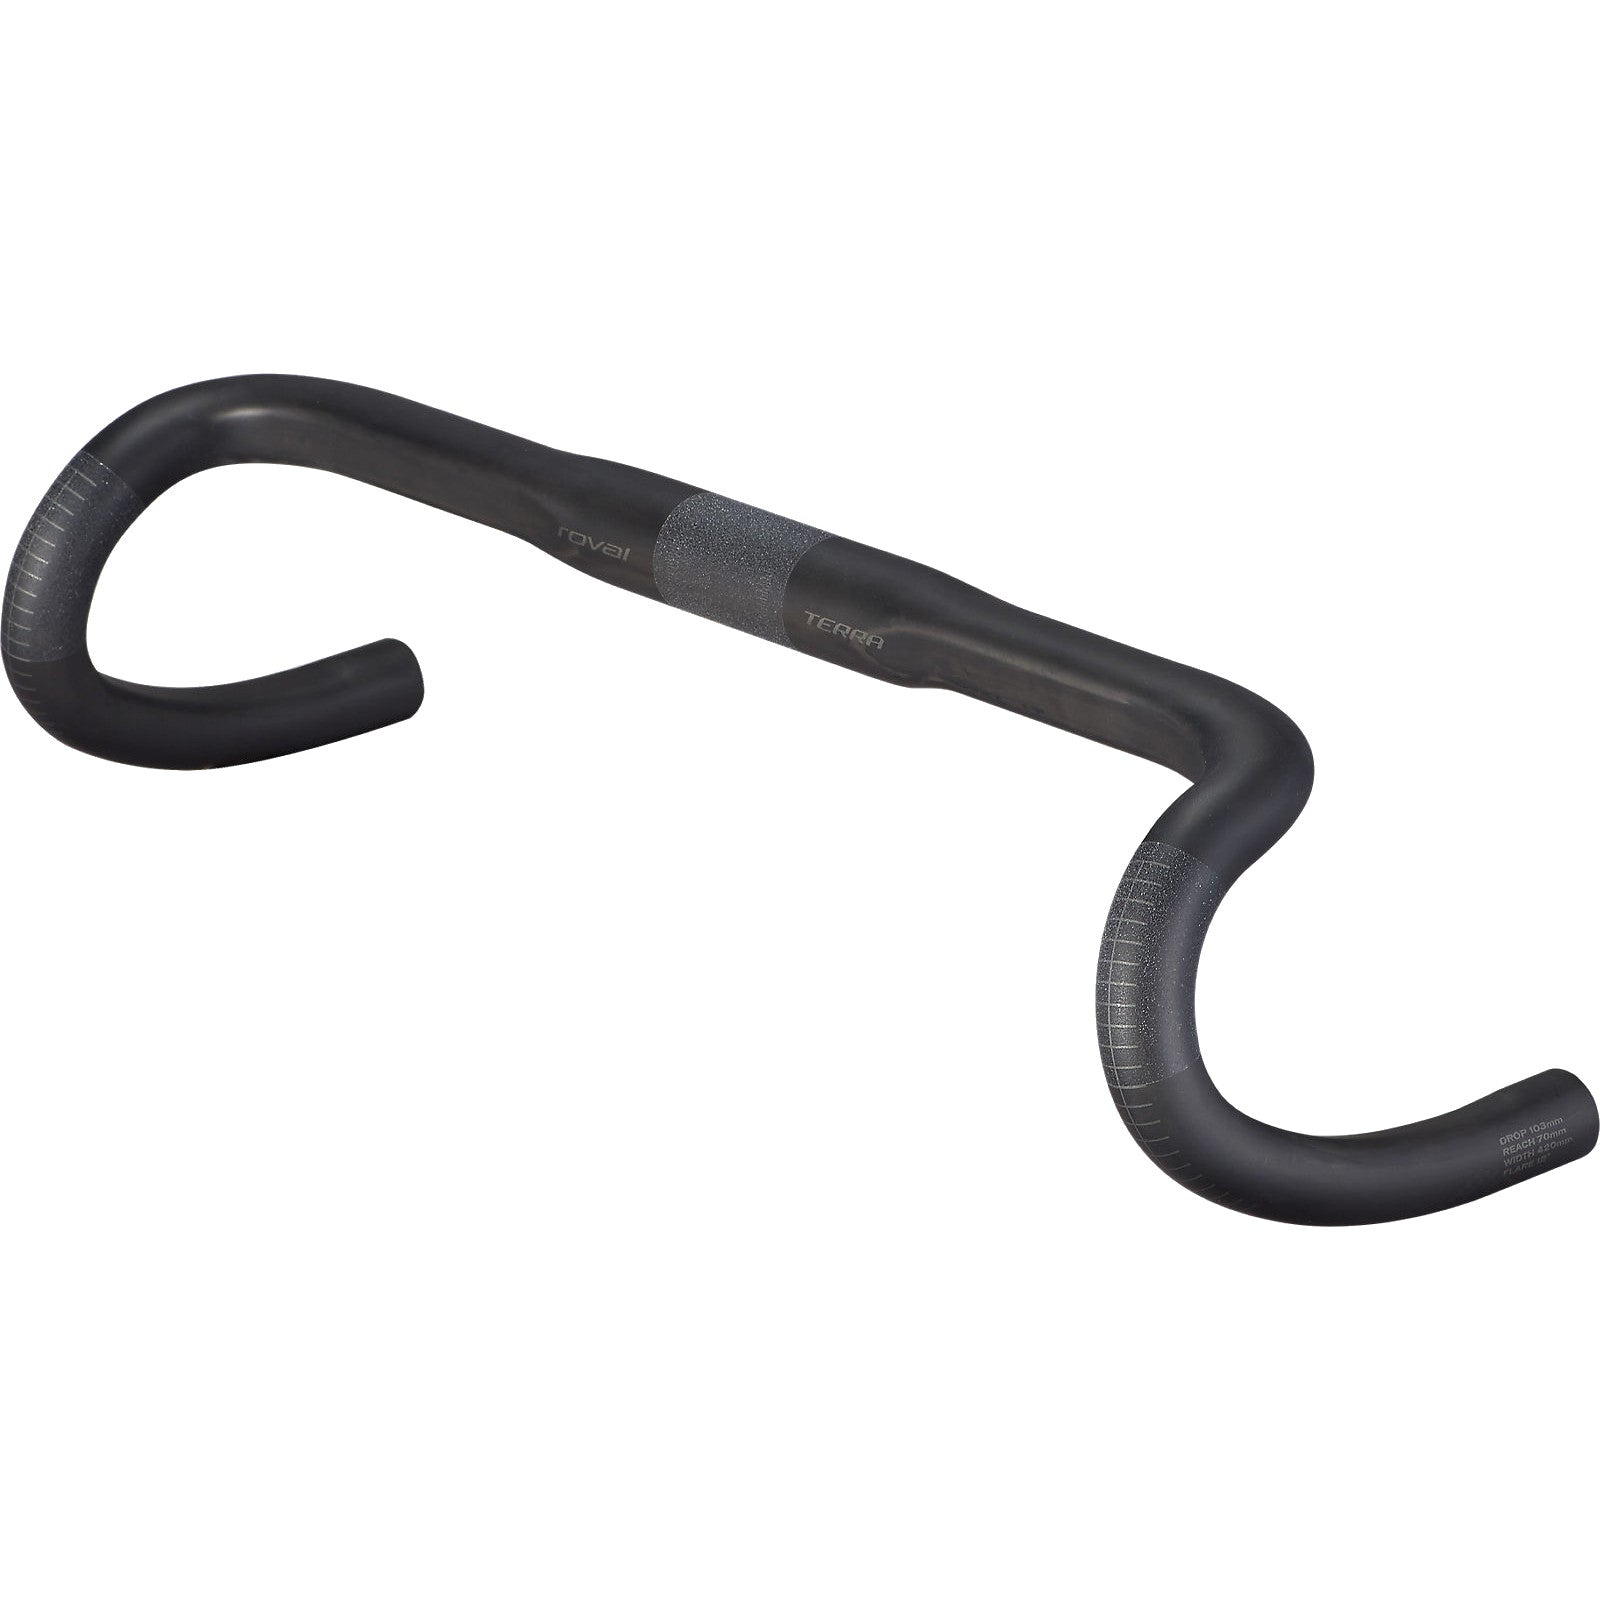 Roval Rapide Road Bar 31.8Mm